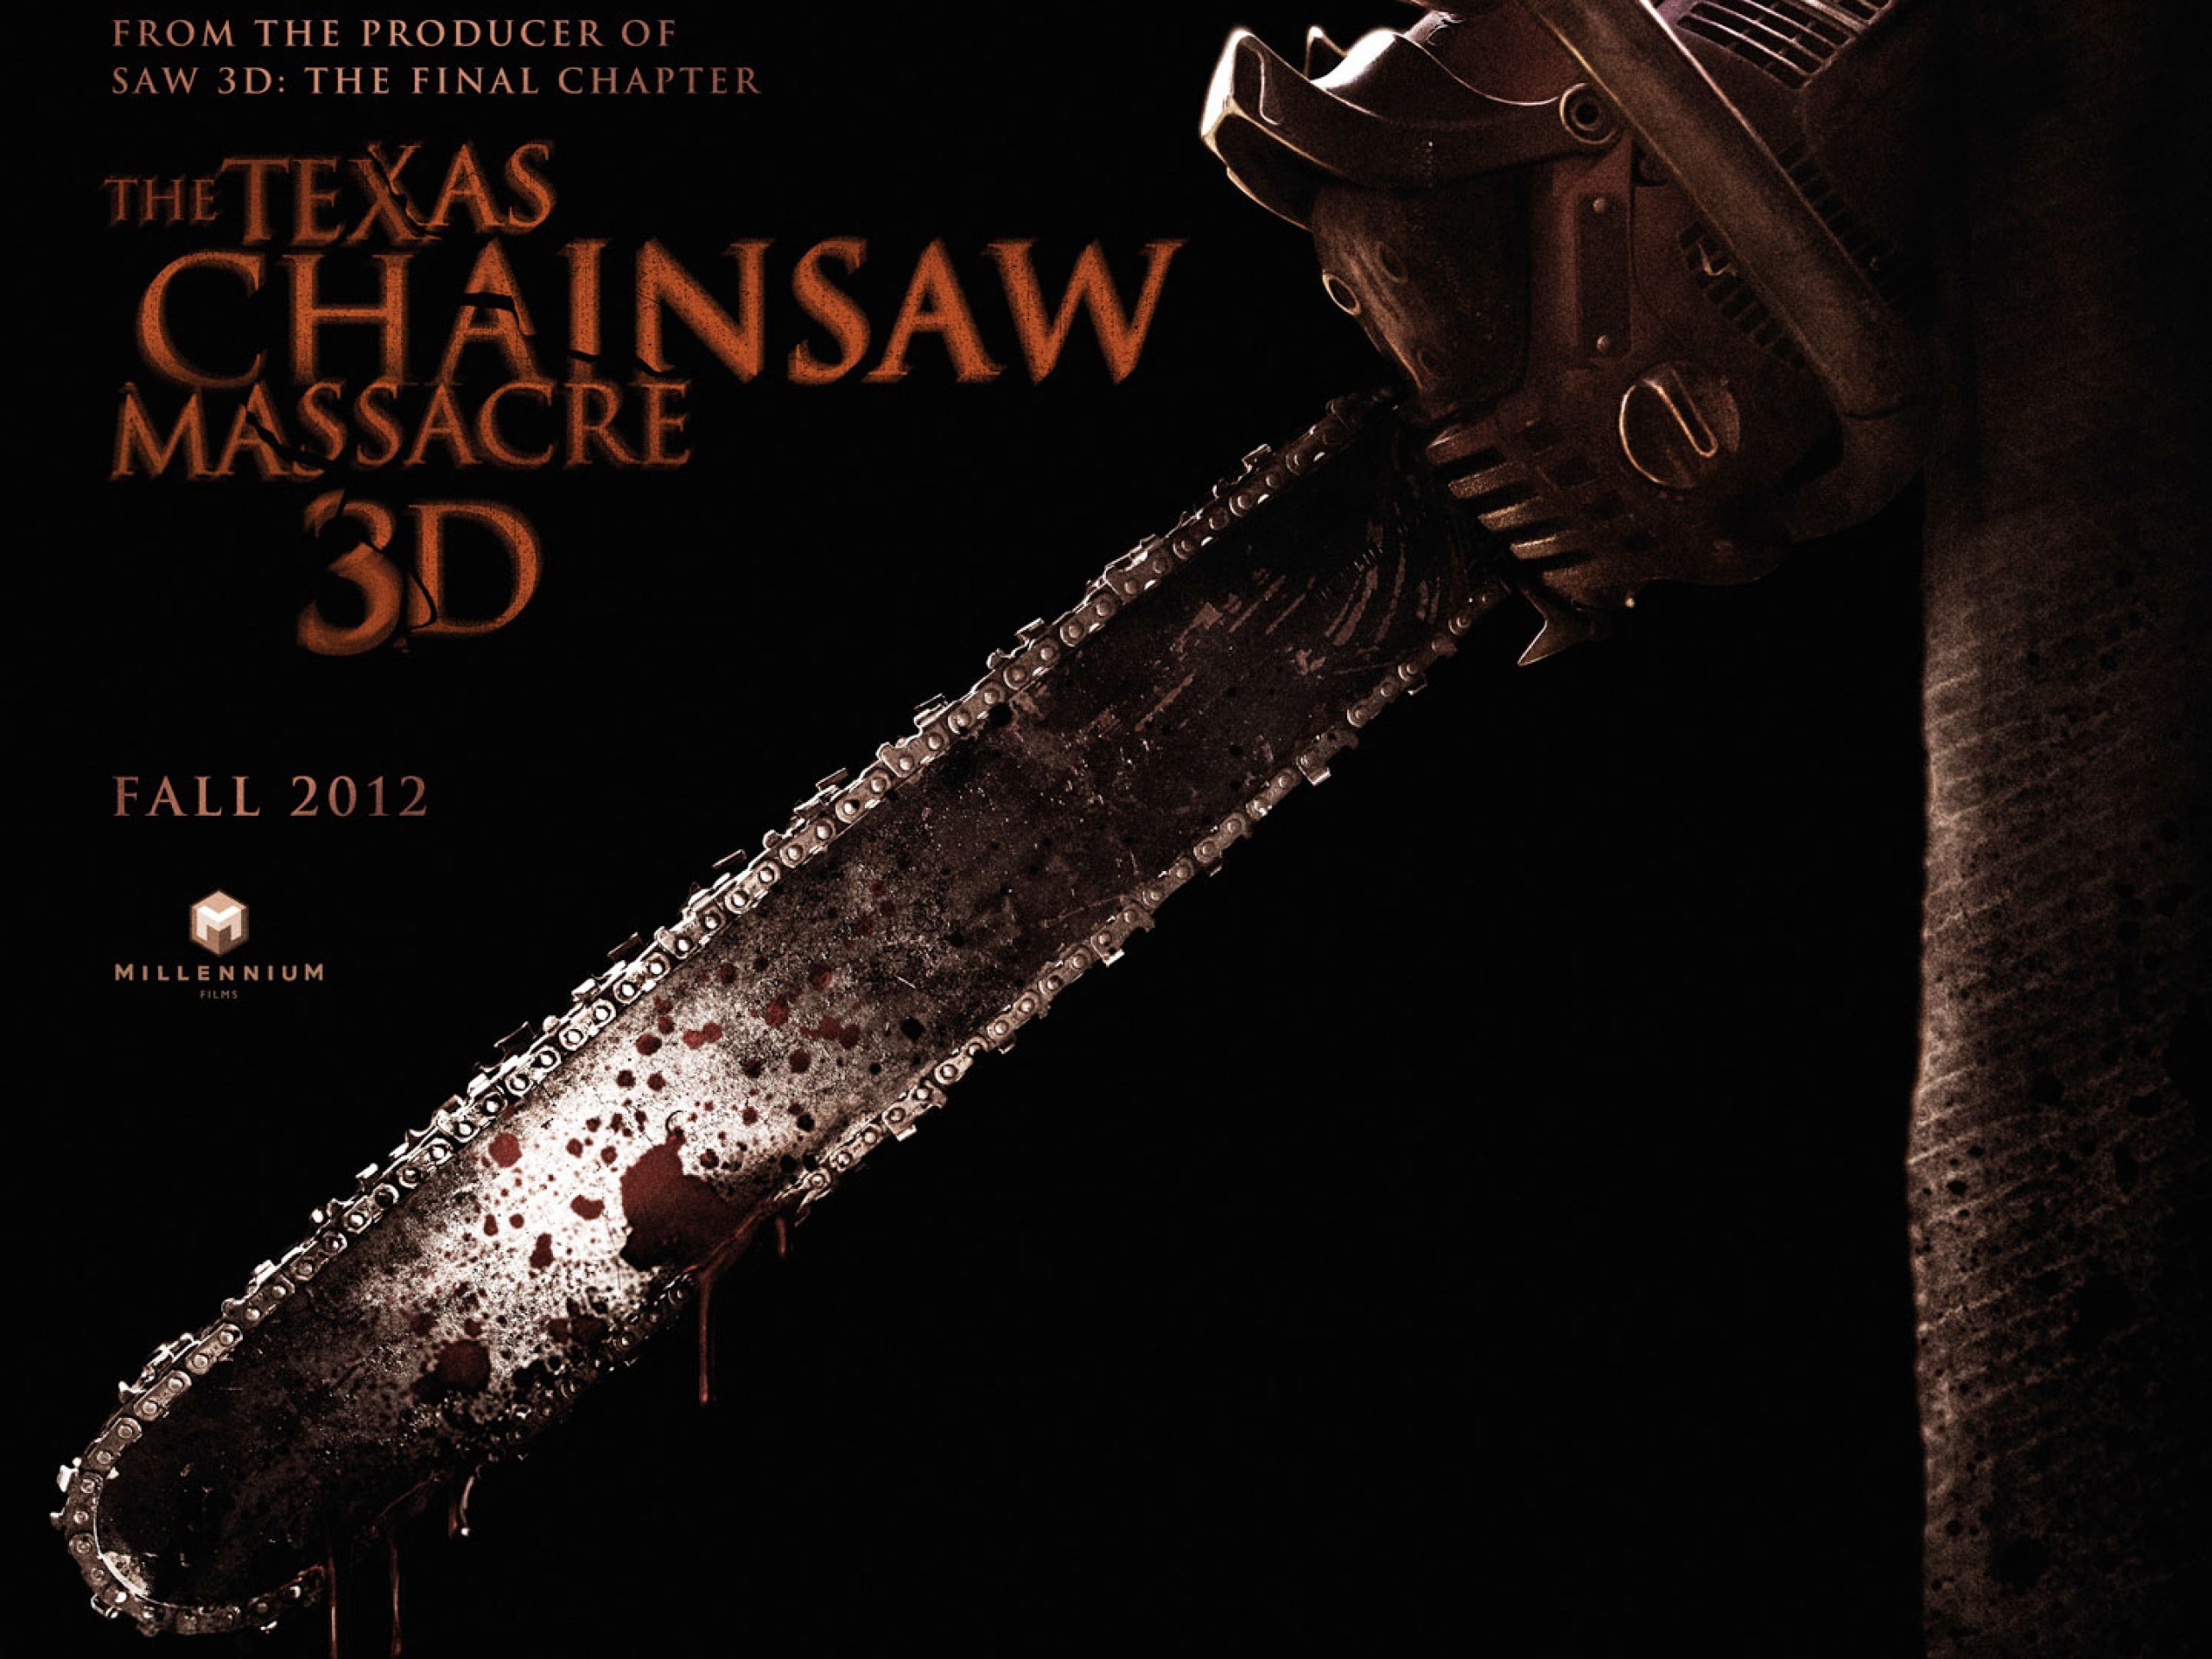 Texas Chainsaw Massacre 3D 2013 Movie   New HD Wallpapers